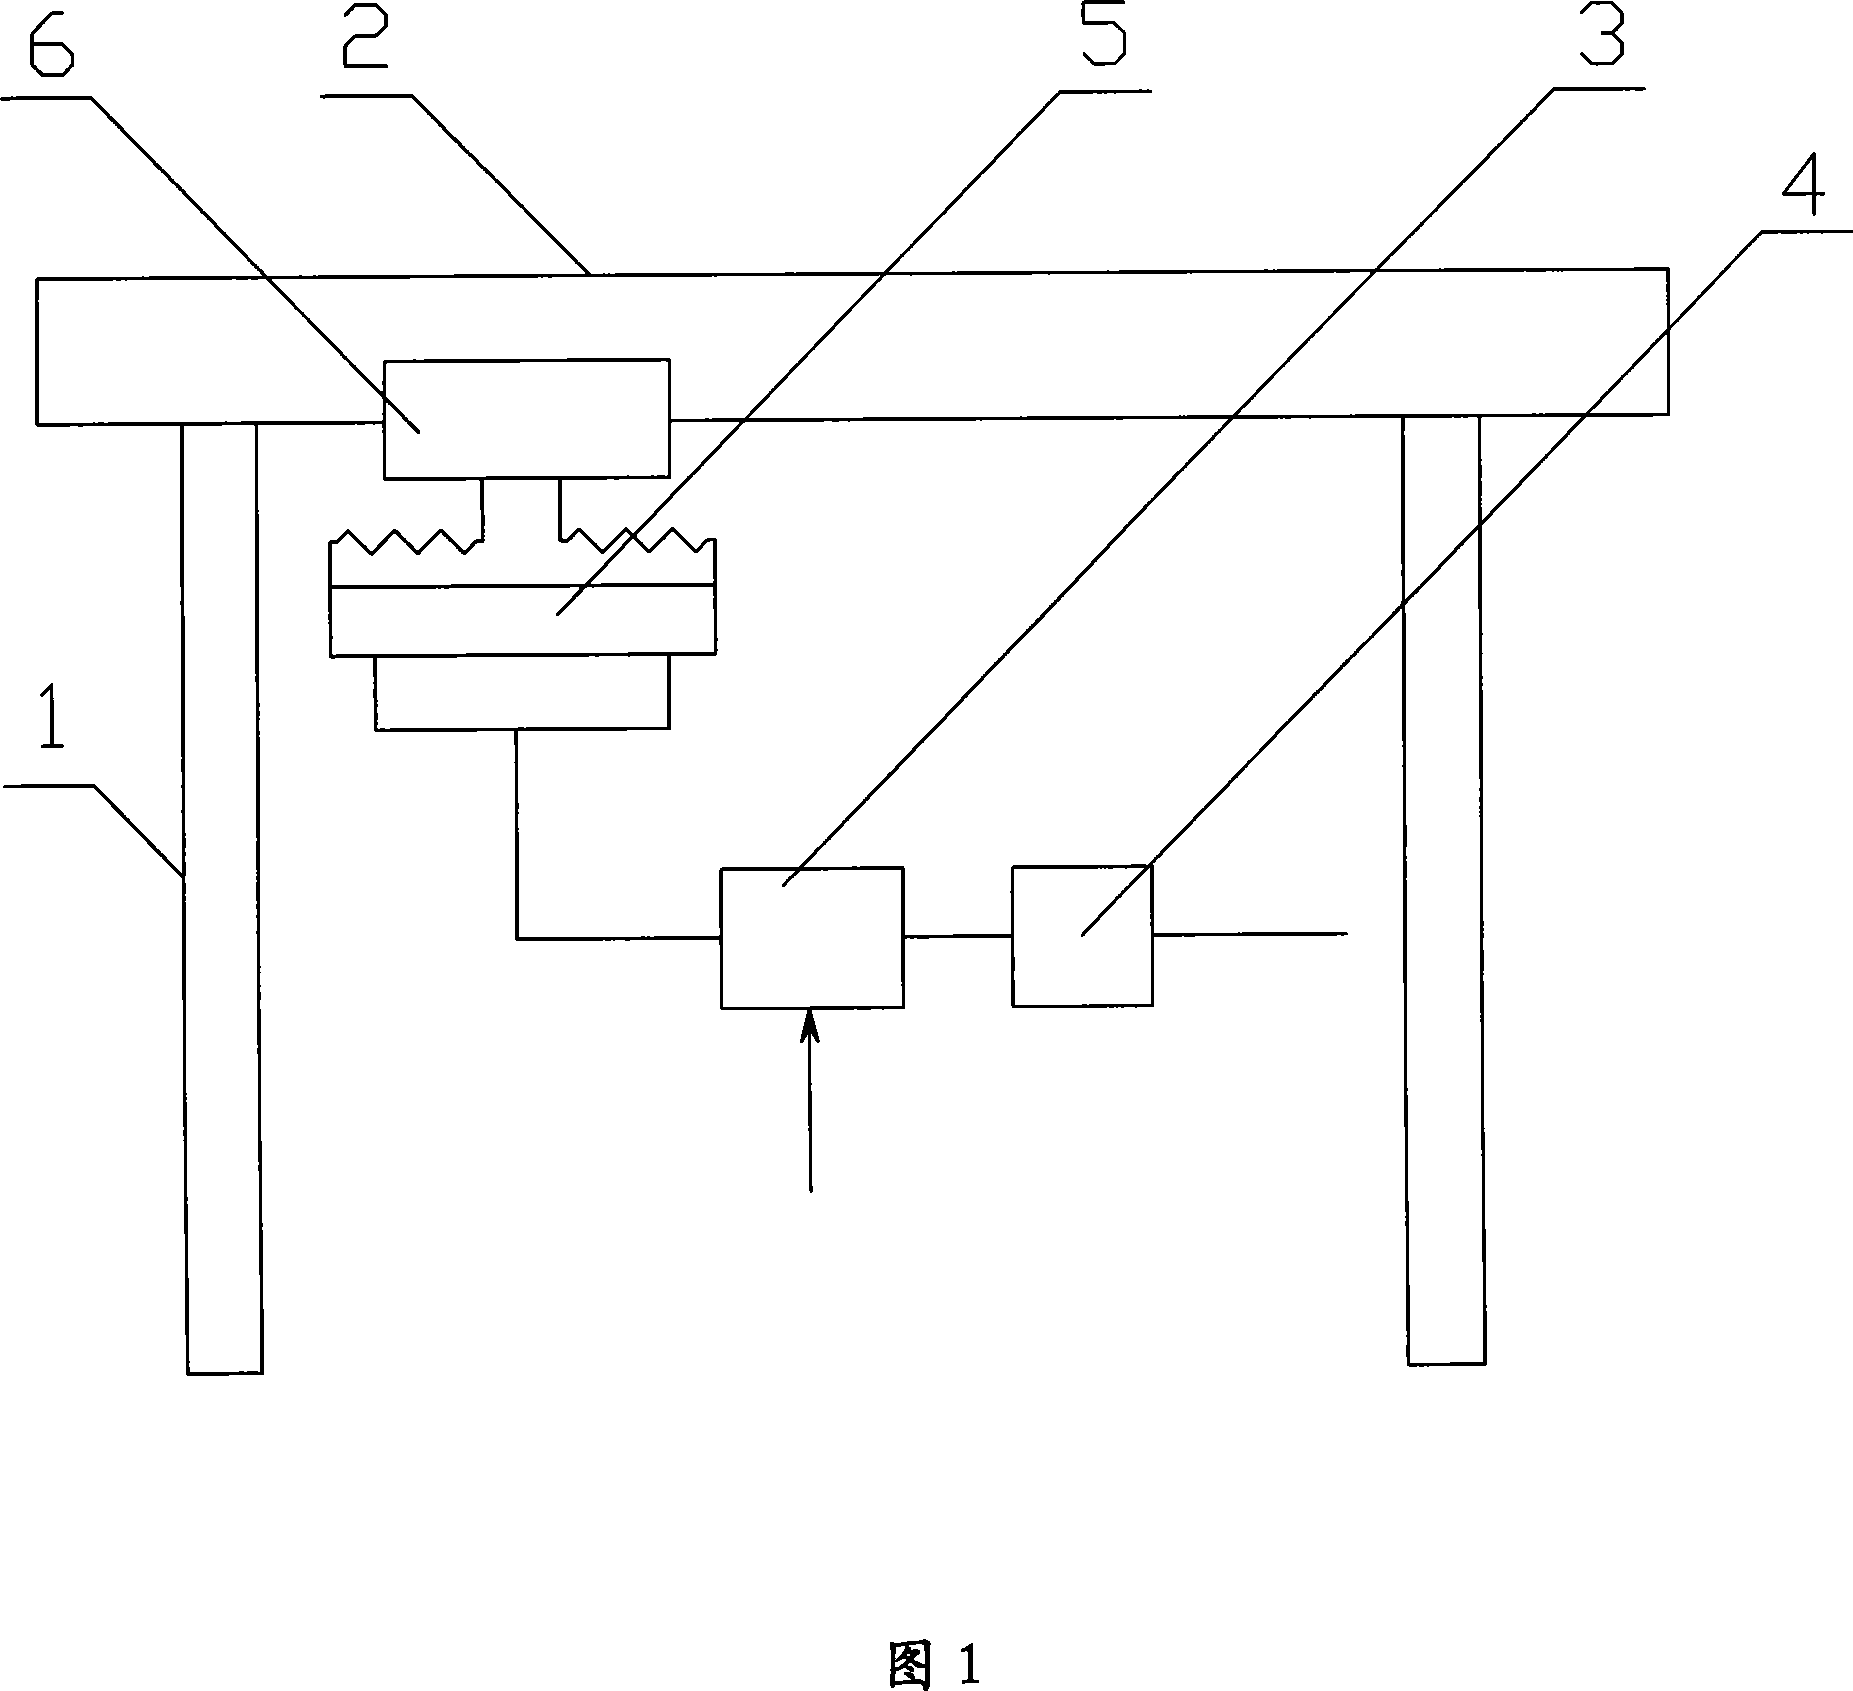 Table self with acoustics function